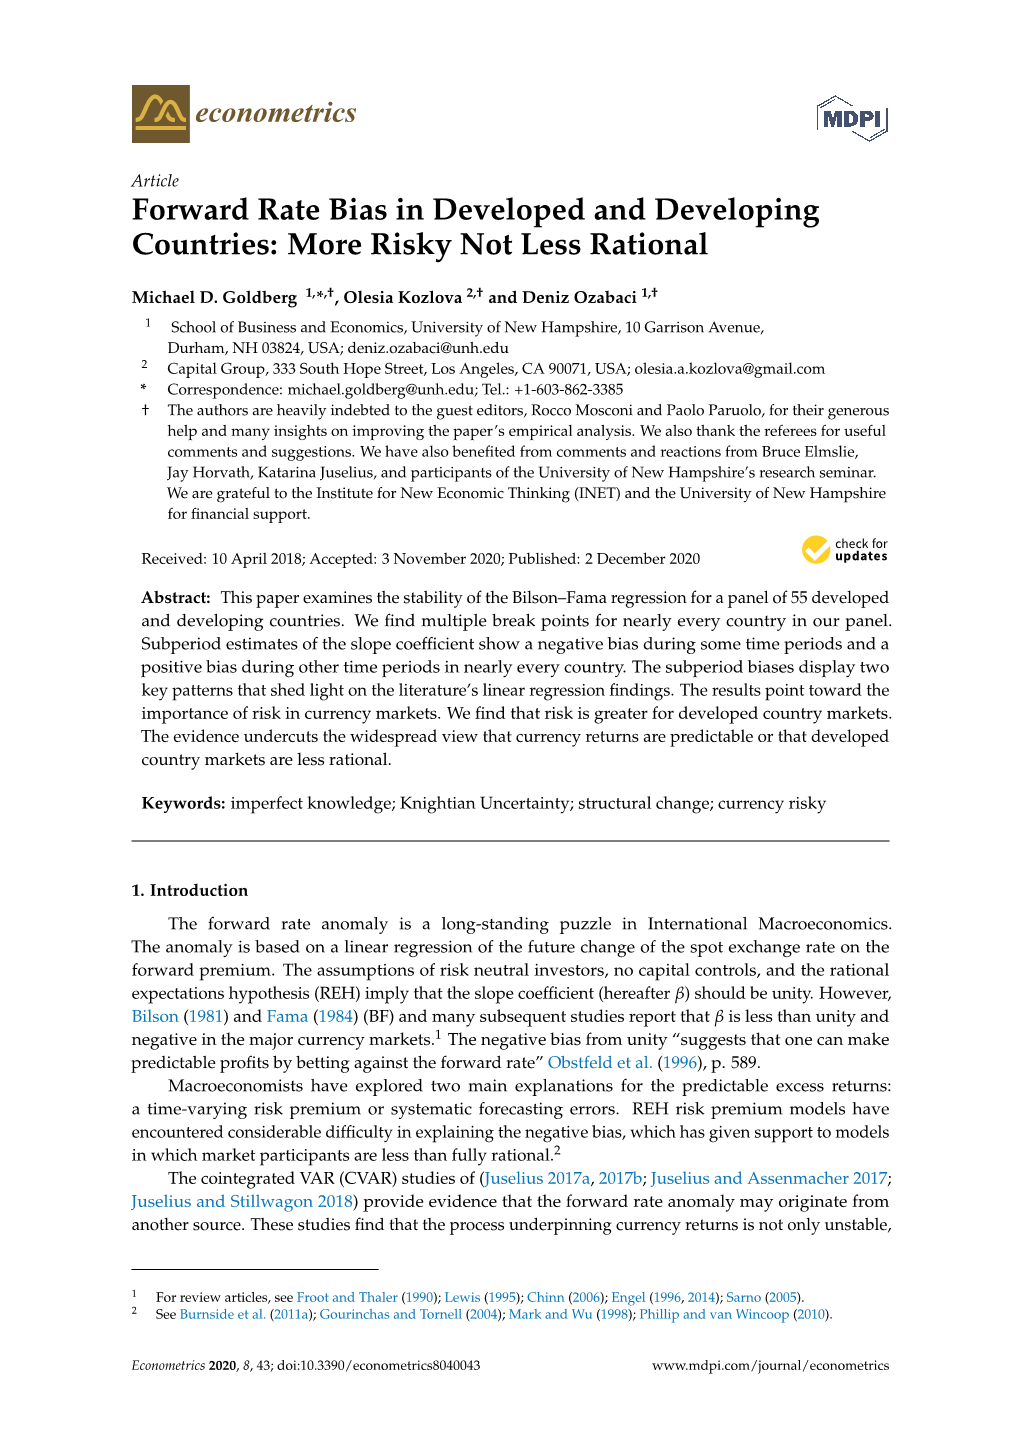 Forward Rate Bias in Developed and Developing Countries: More Risky Not Less Rational